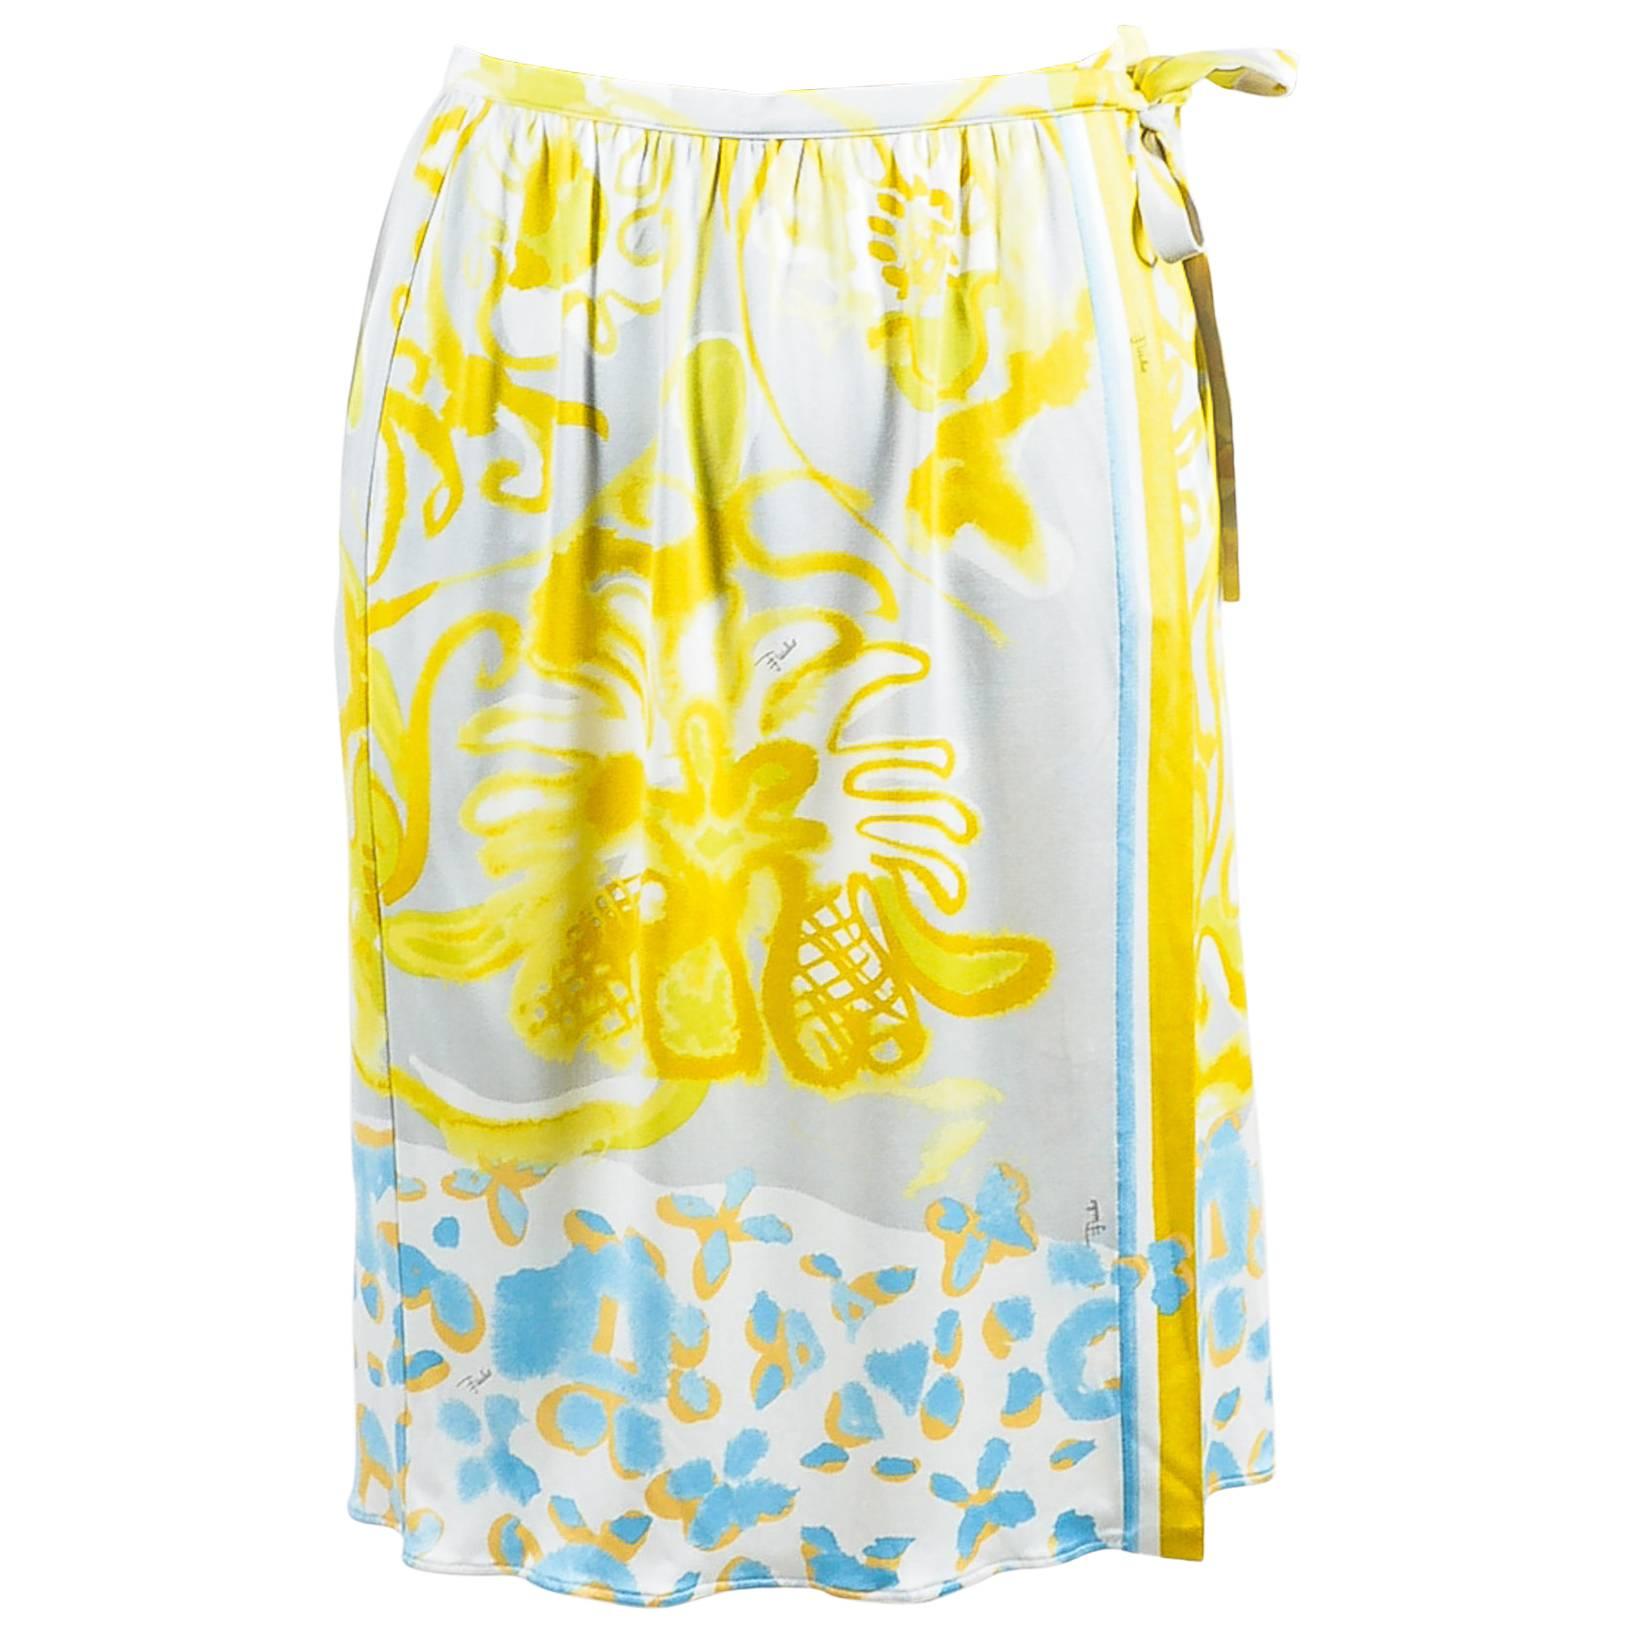 Emilio Pucci Yellow Blue Gray Silk Floral Watercolor Print Wrap Skirt SZ 4 For Sale